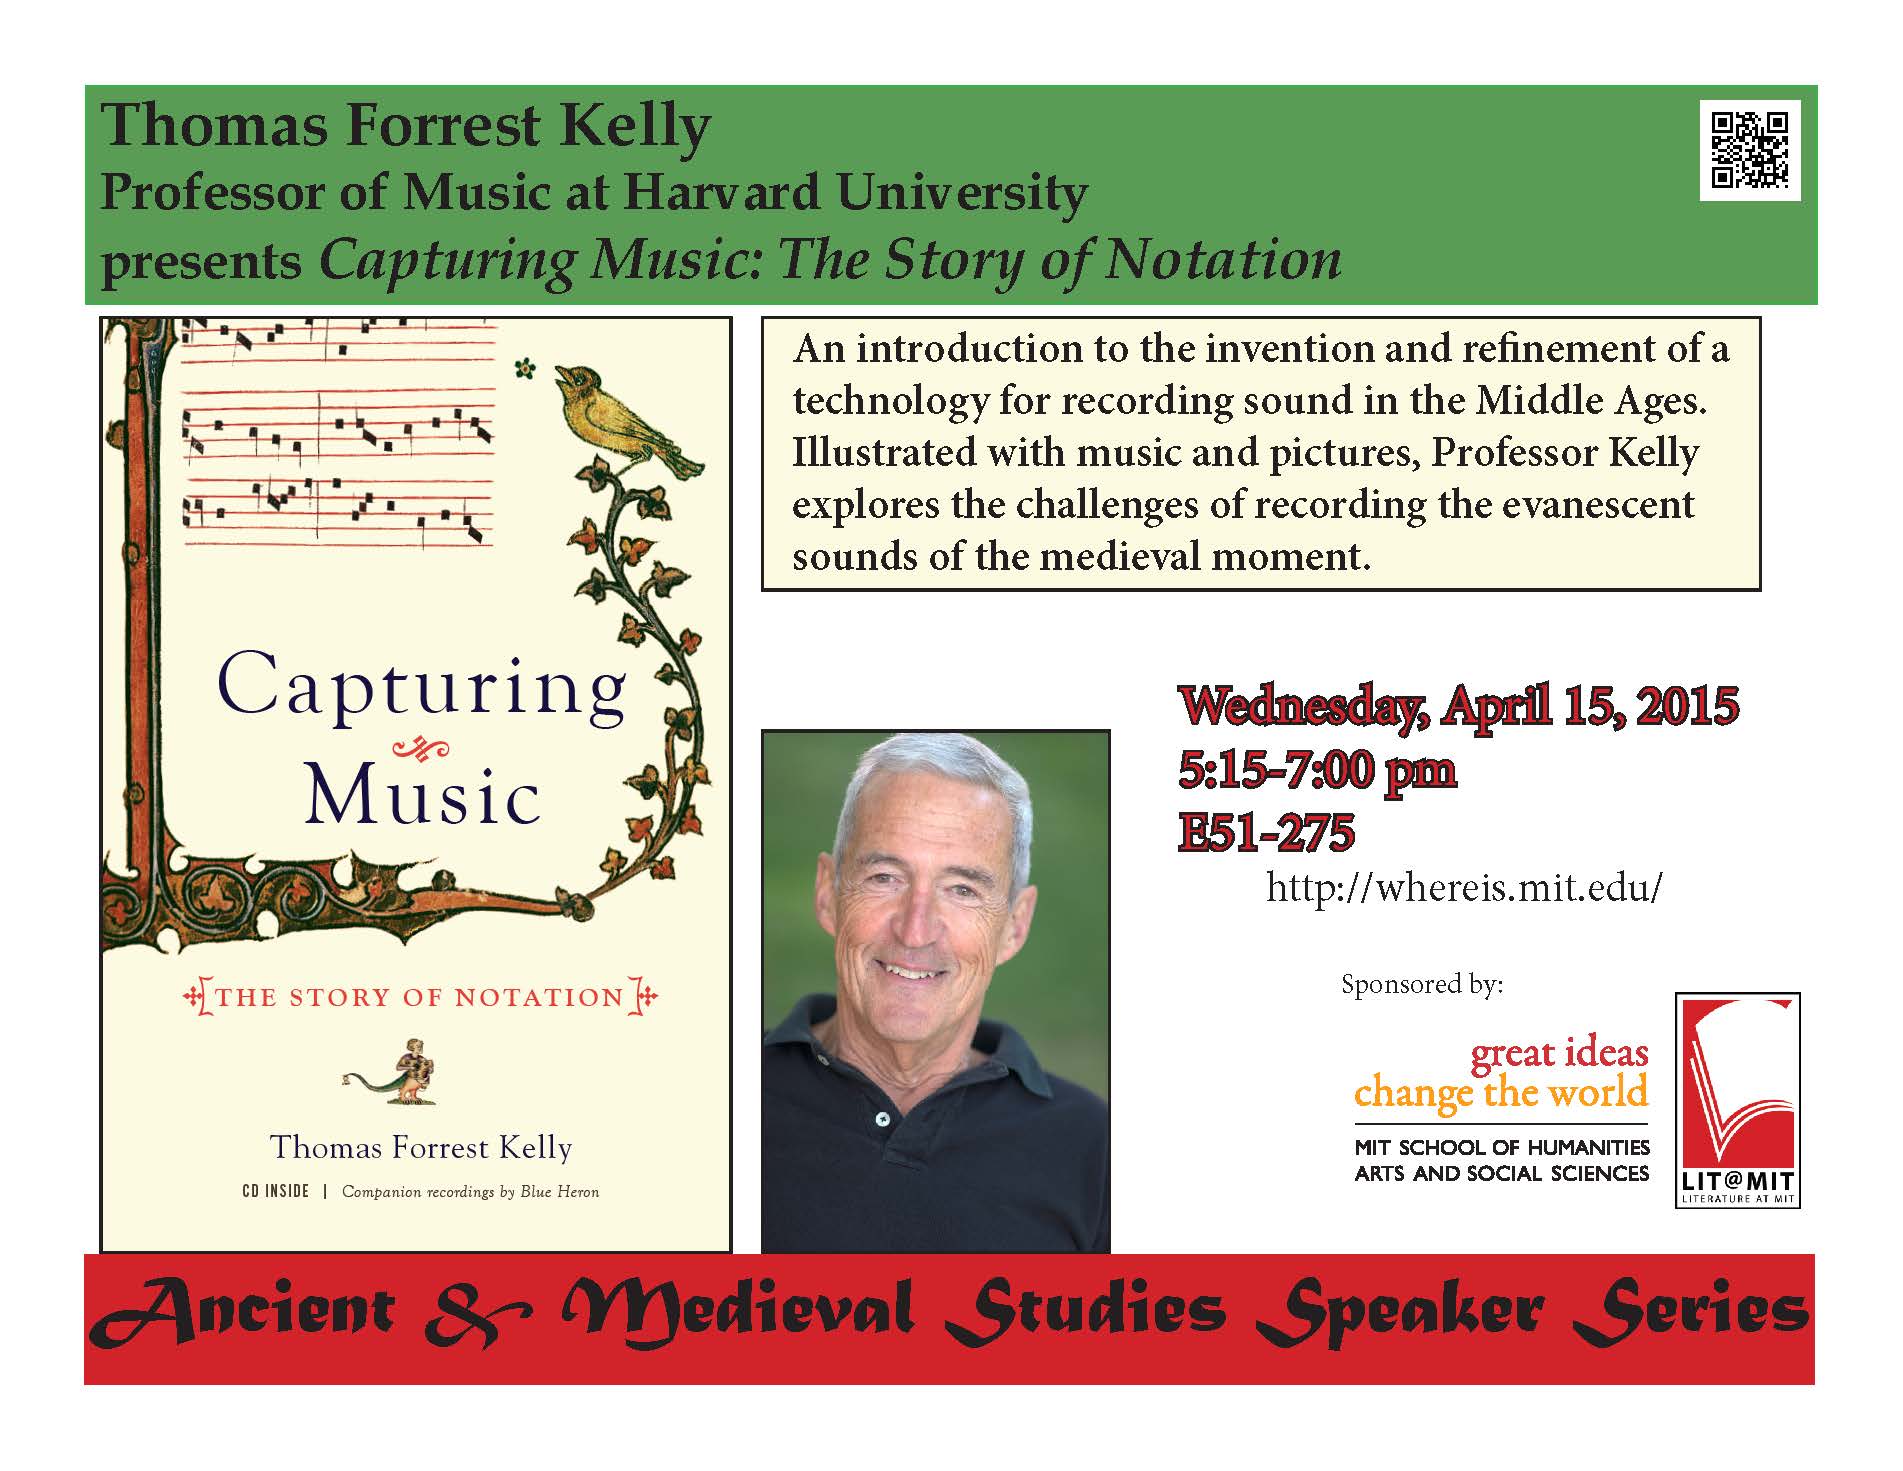 Tonight! AMS | Thomas Forrest Kelly | "Capturing Music: The Story of Notation" | Apr 15, 5:15p | E51-275